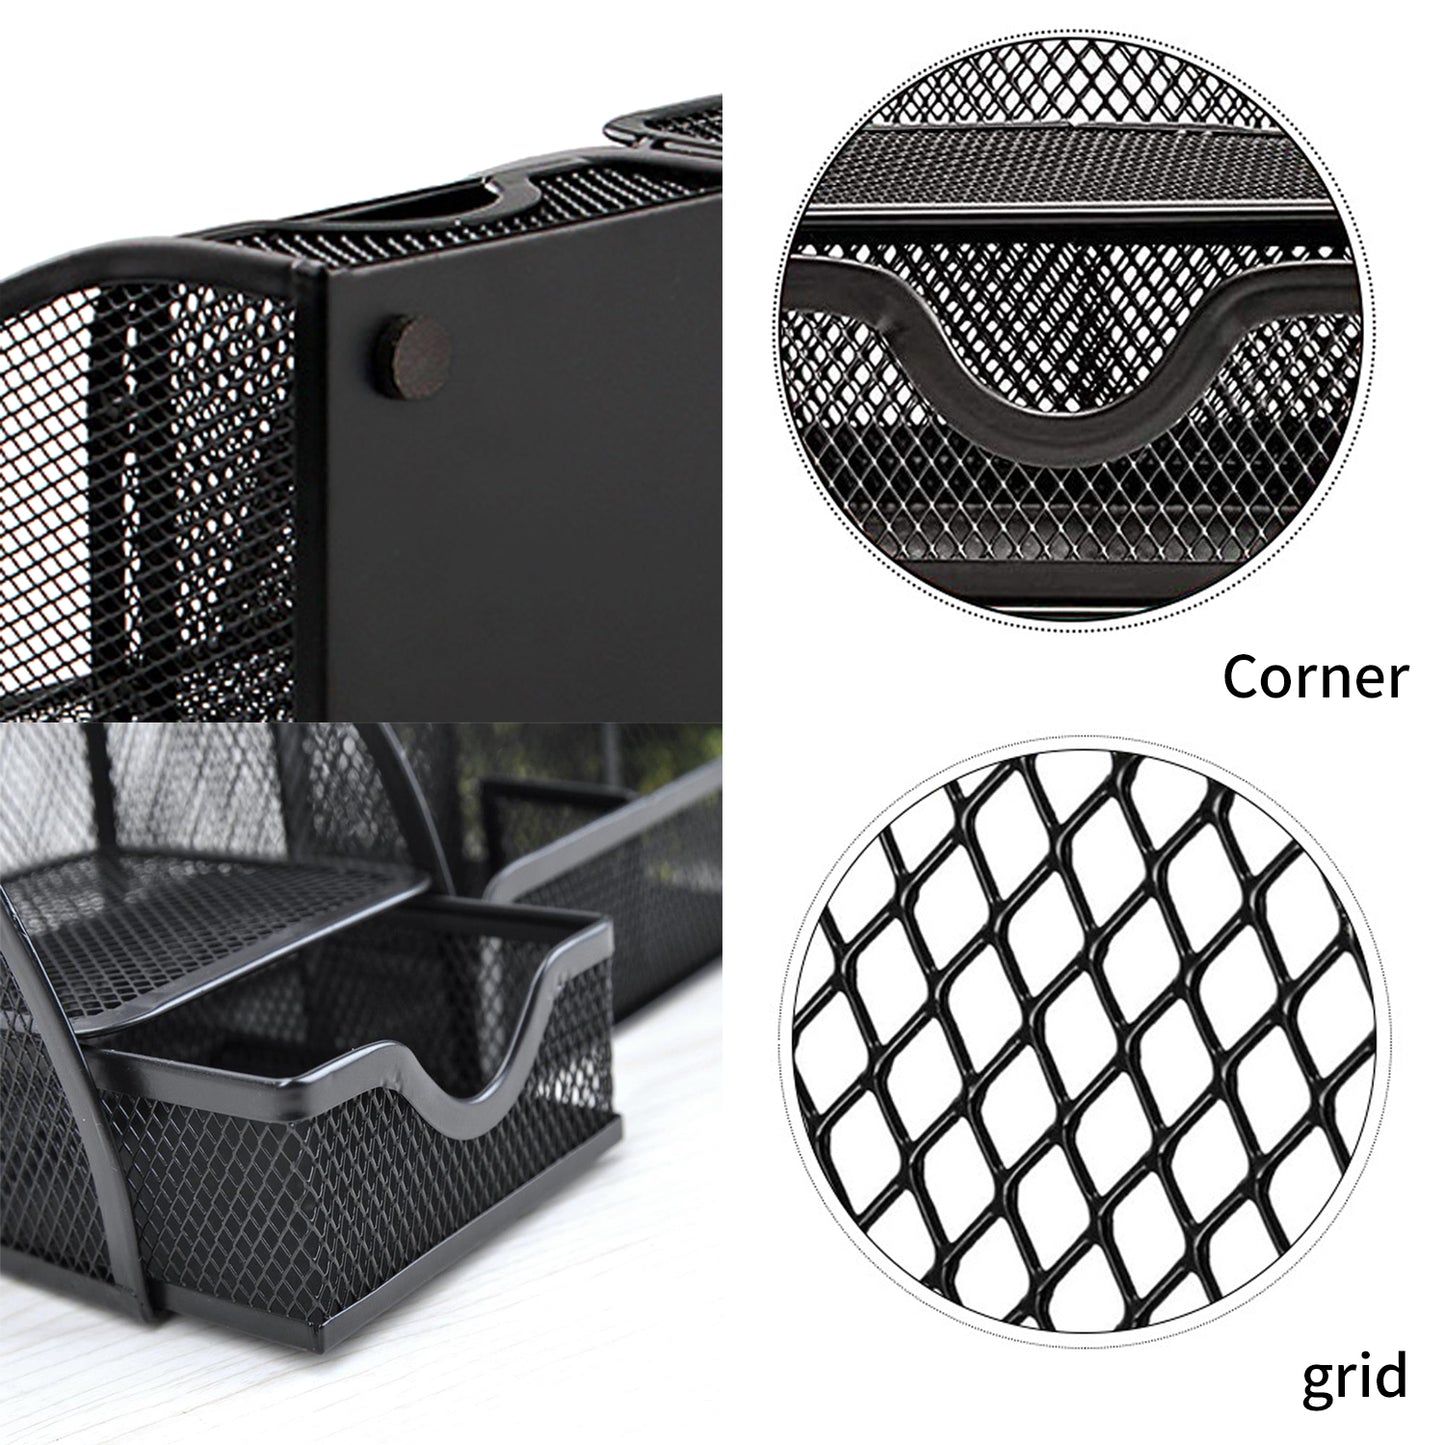 MDHAND Office Desk Organizer and Accessories Desk Drawer Organizer with 6  Compartments, Mesh Pencil Desk Organizer For Home Office